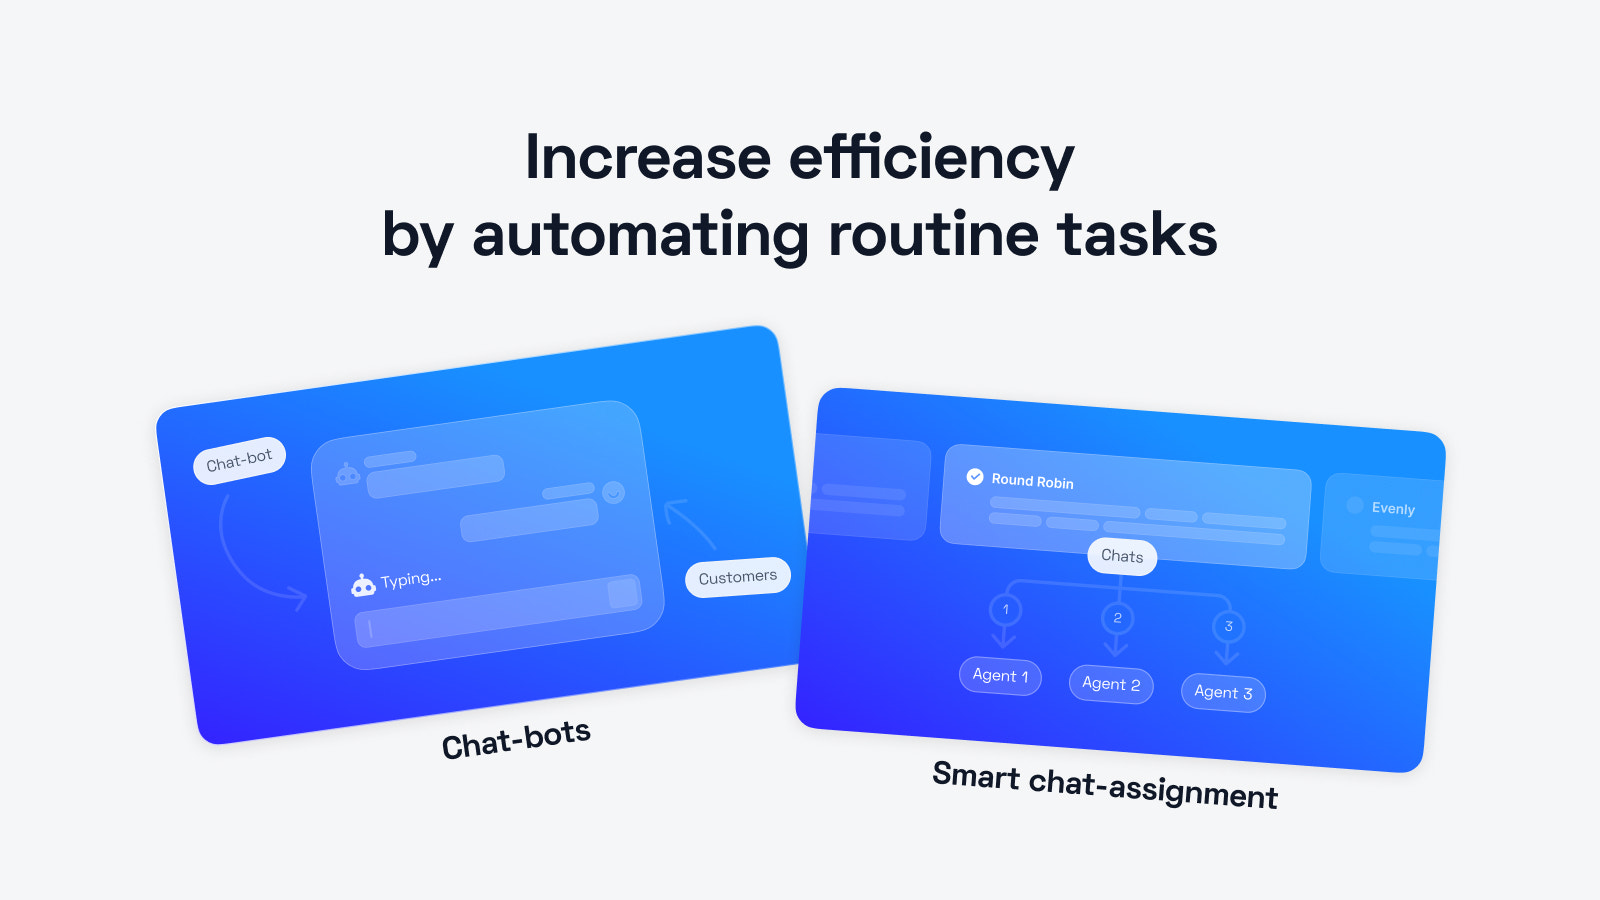 Increase efficiency by automating routine tasks